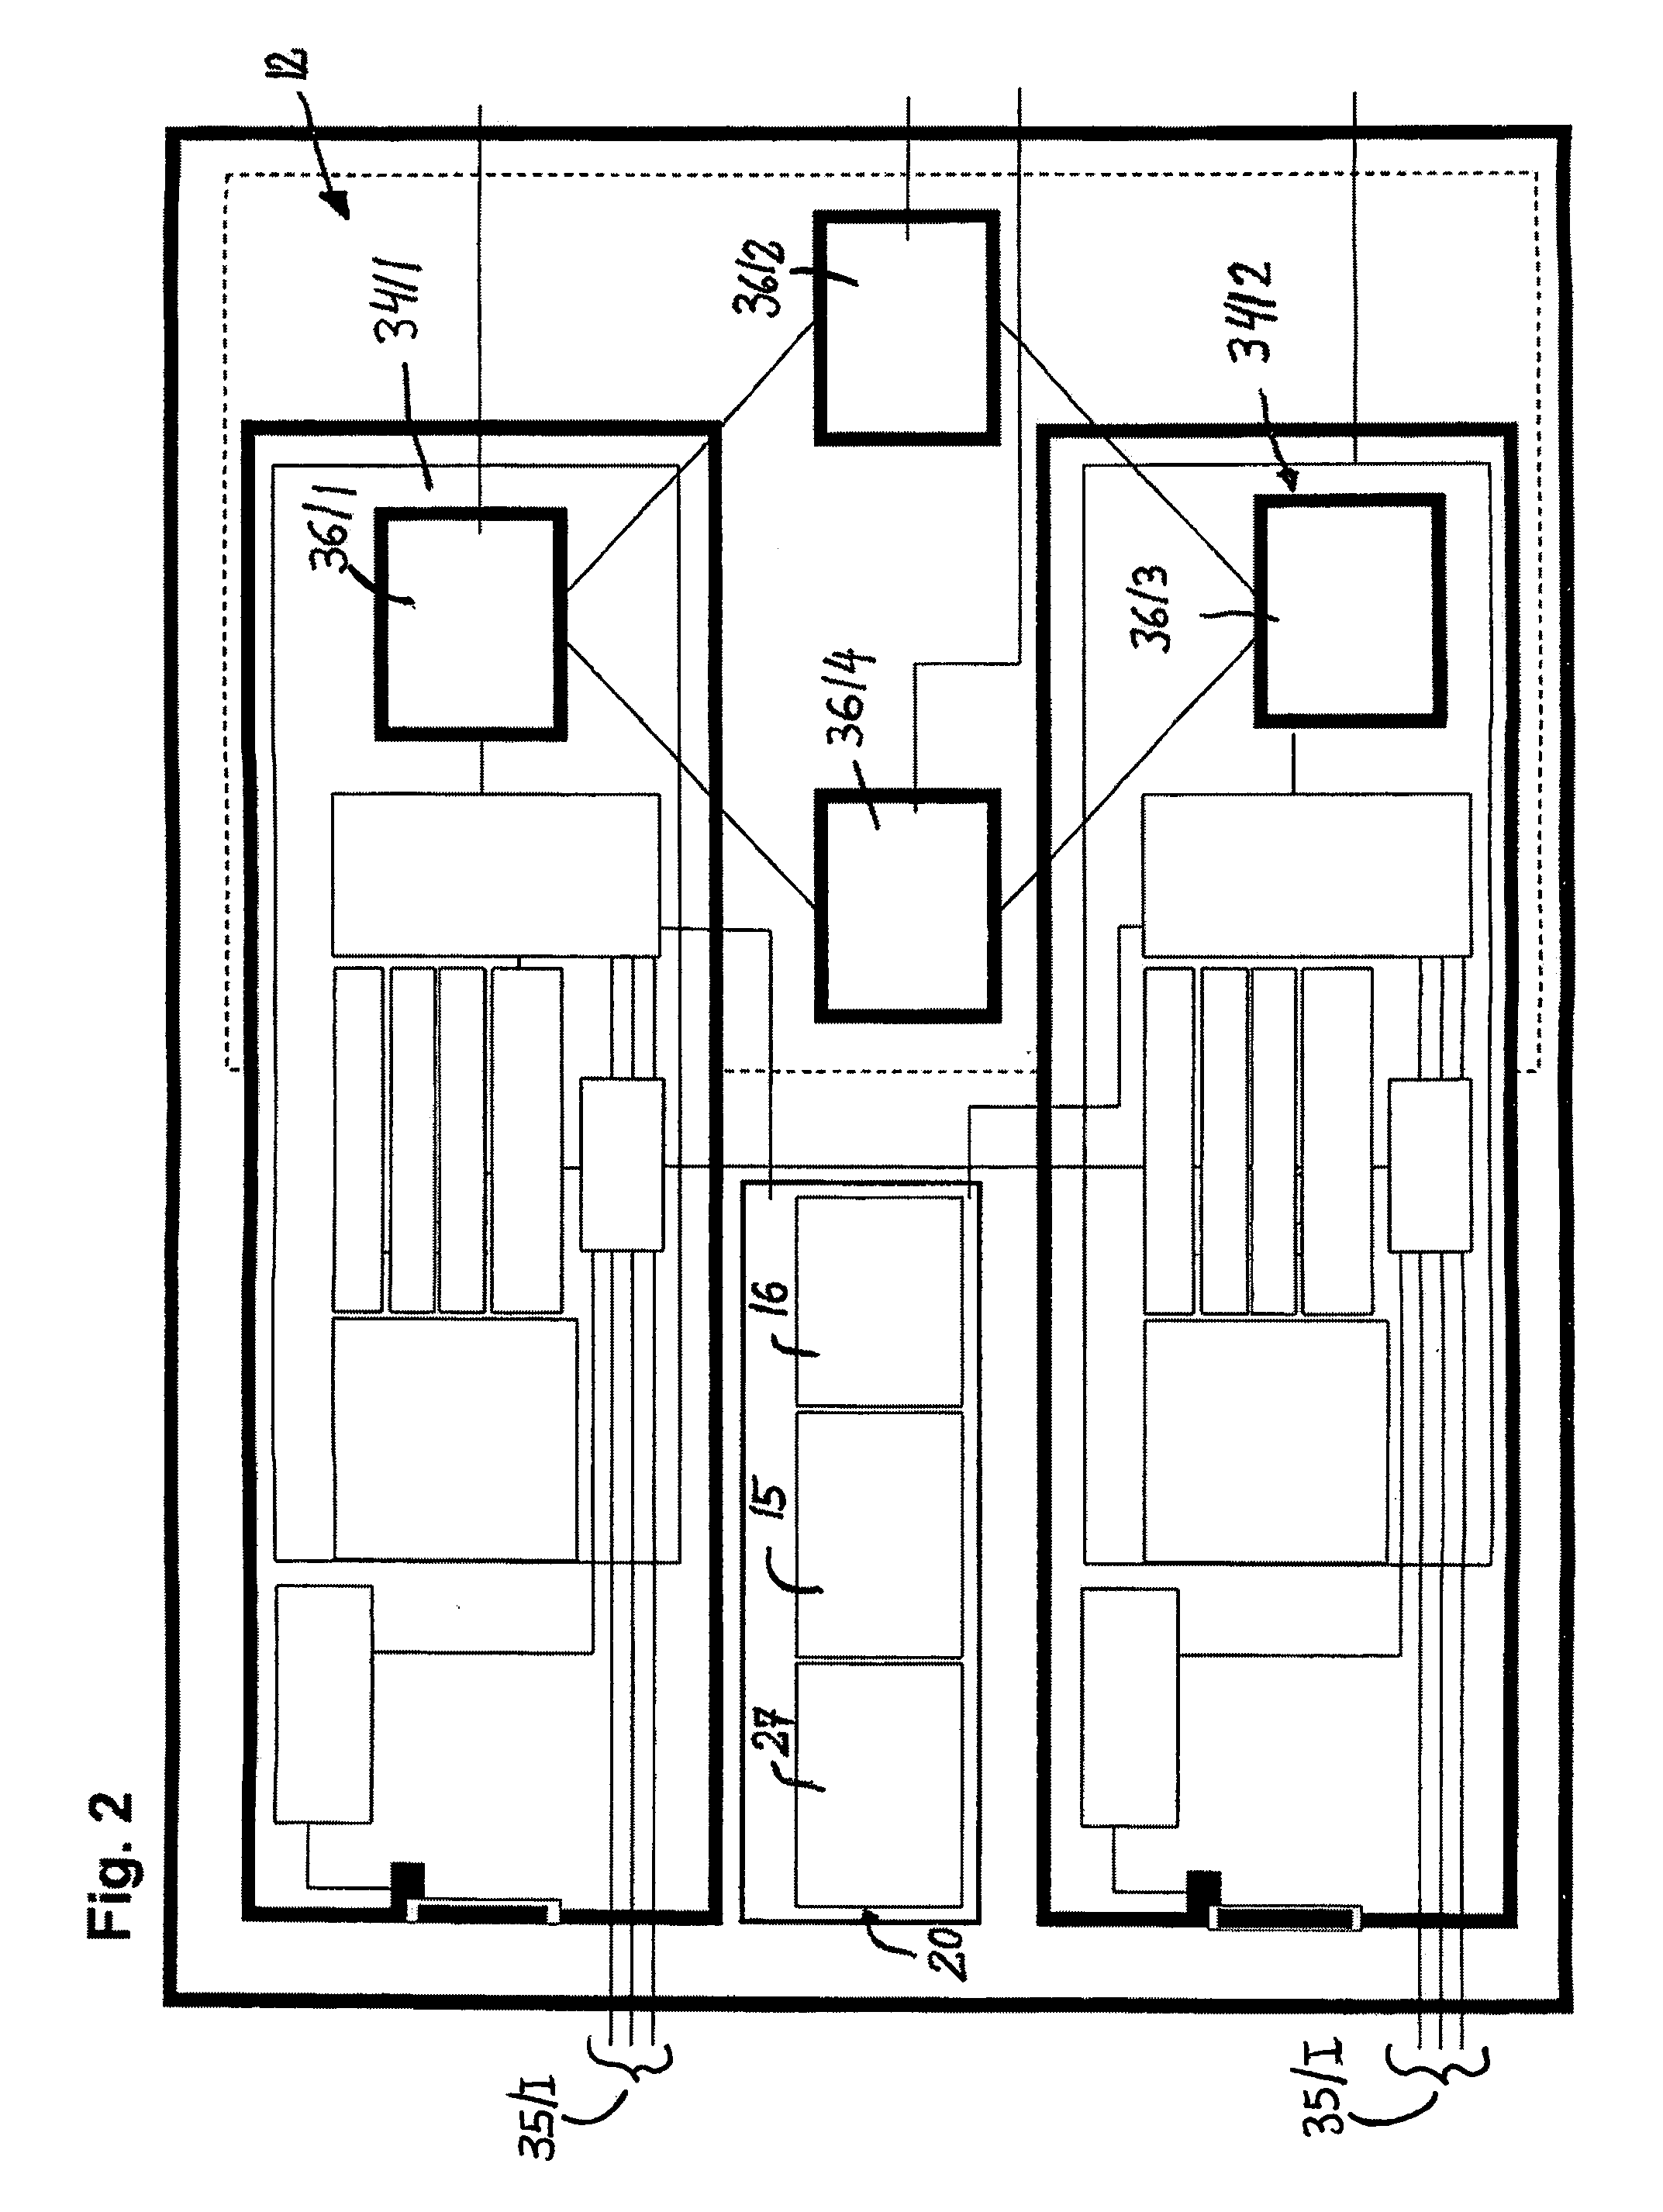 Device for generating a virtual network user